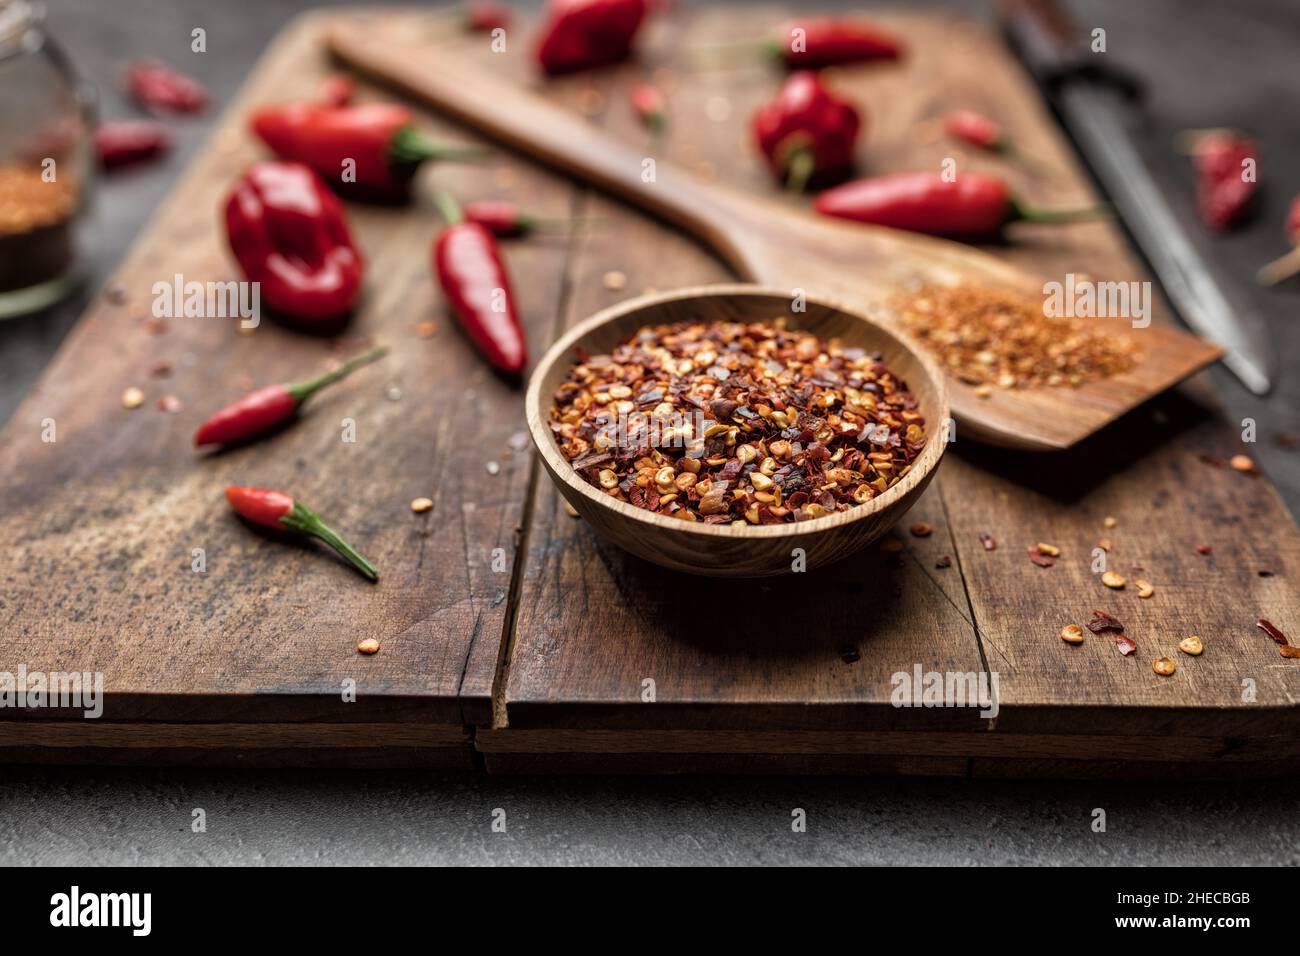 Variety of fresh and dried chili peppers on rustic background Stock Photo